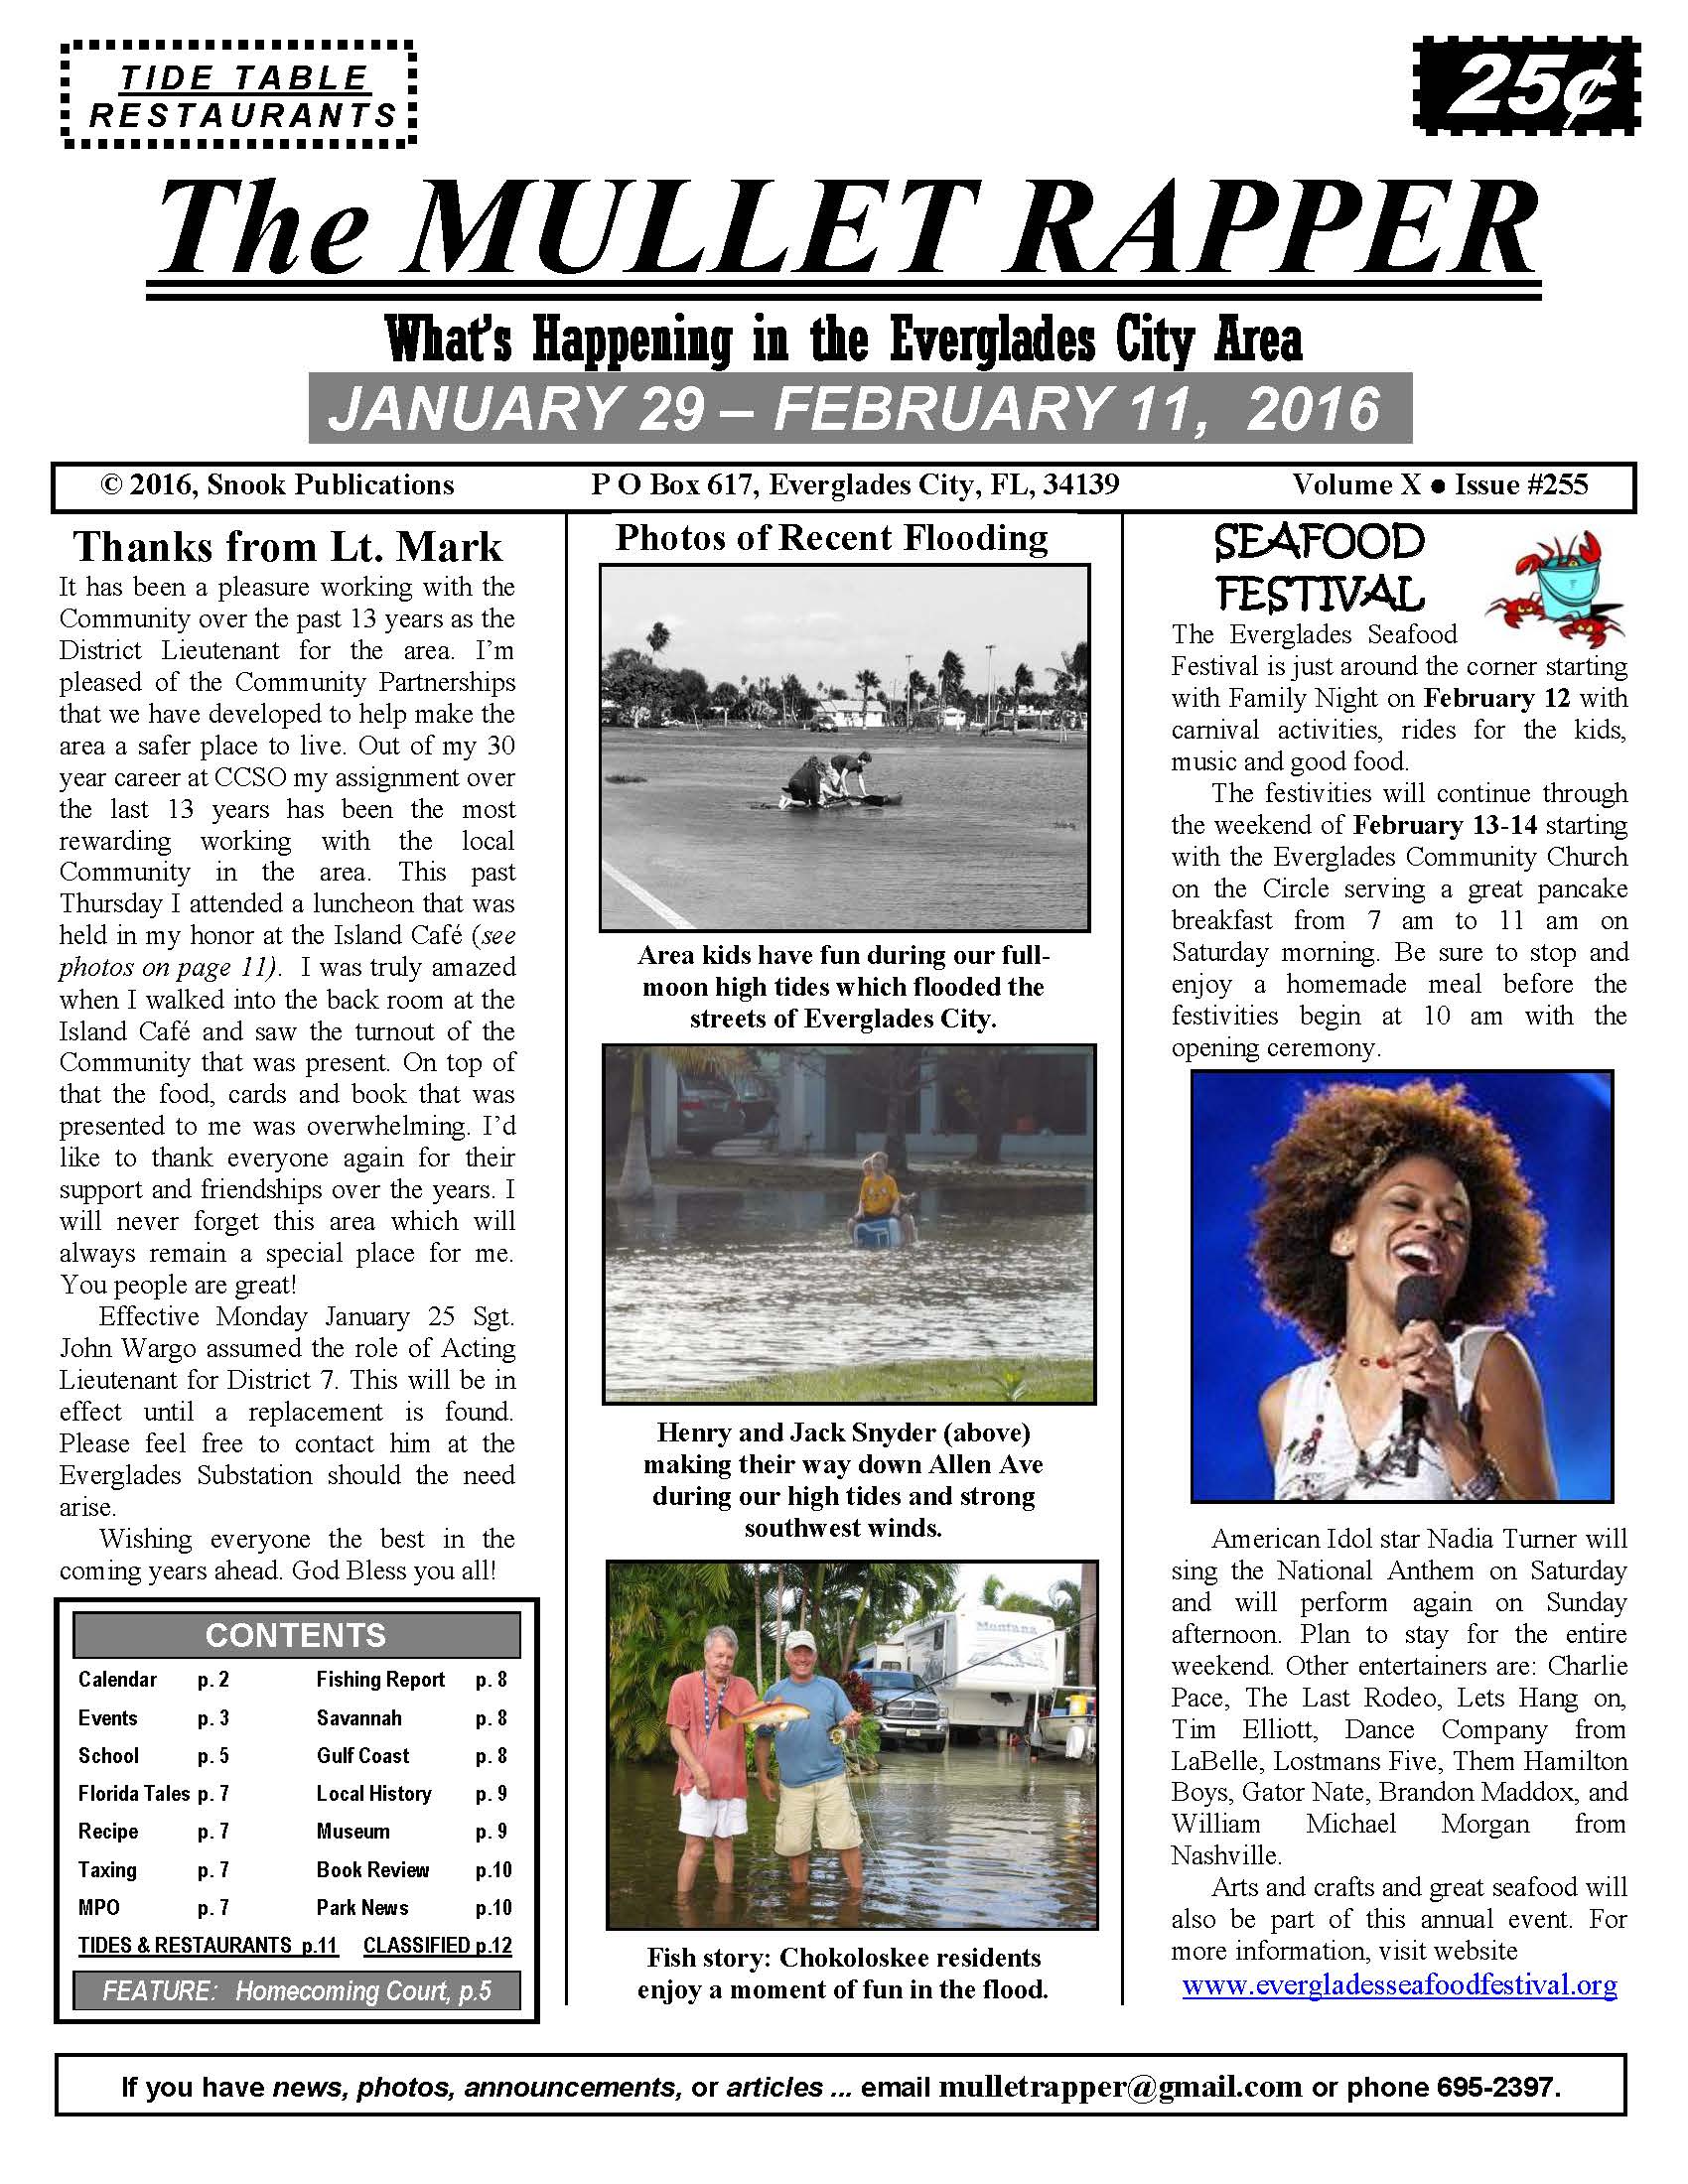 Mullet Rapper Issue #255 January 29, 2016